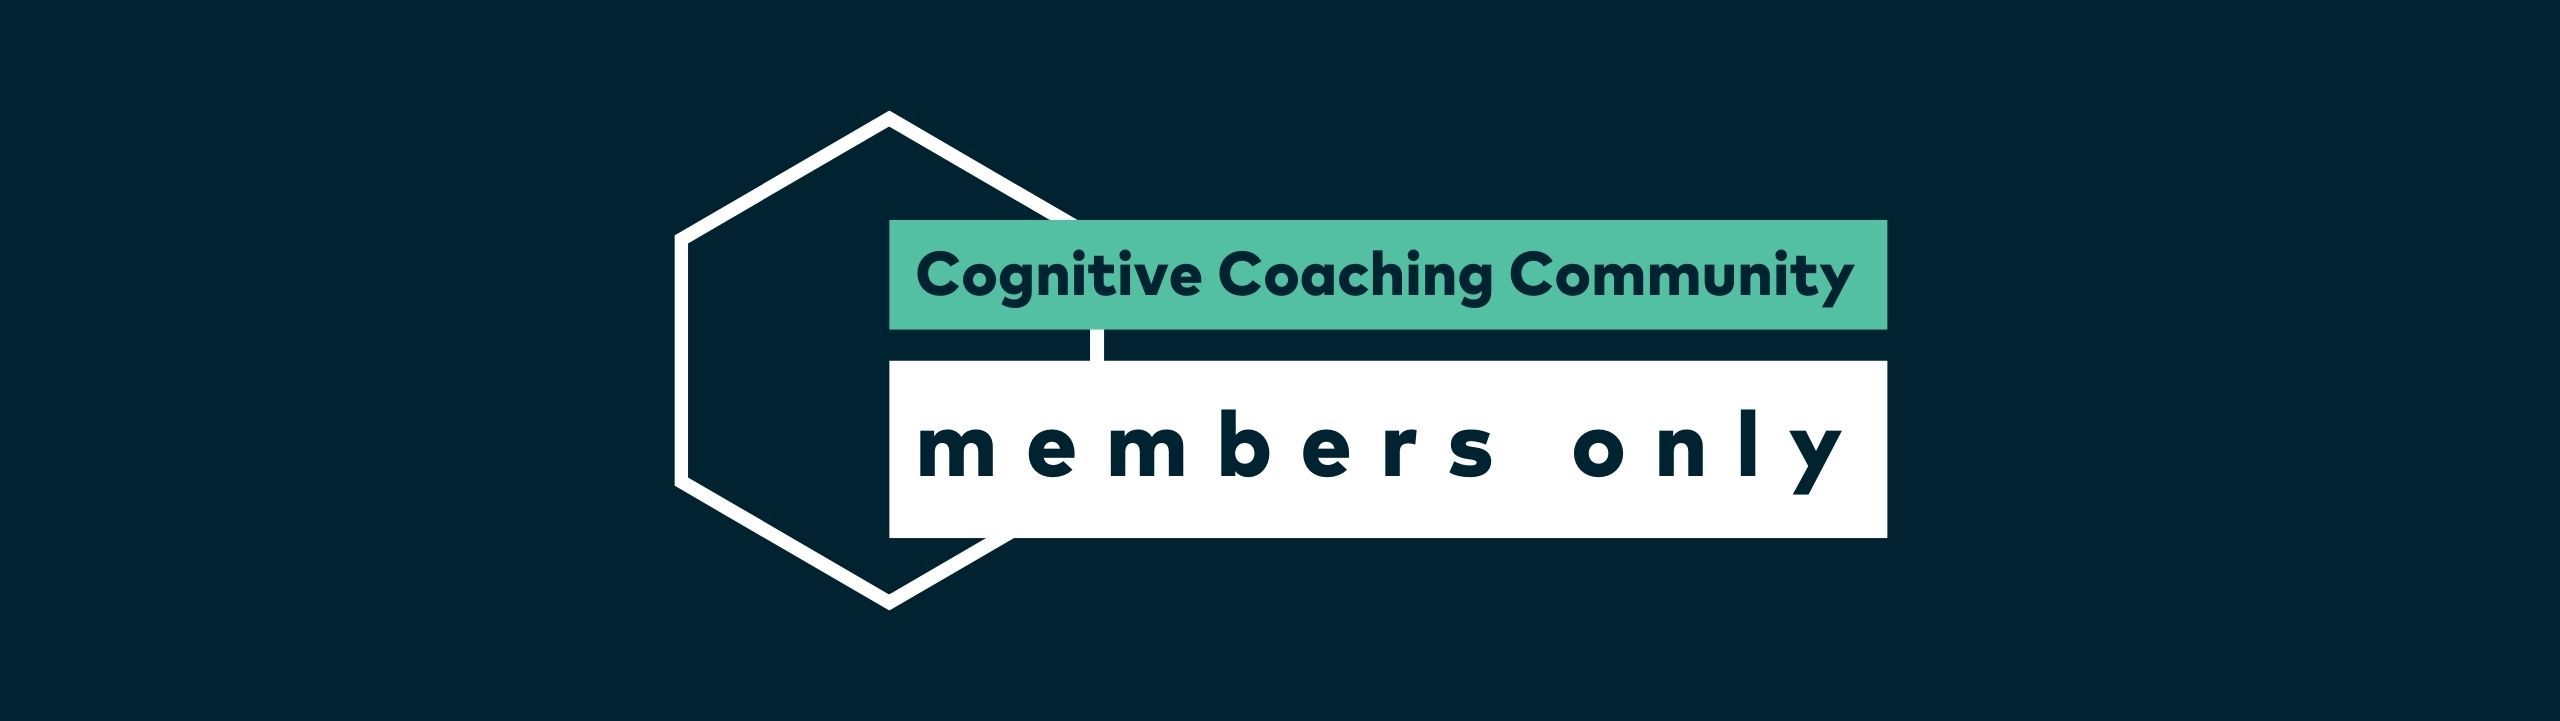 Cognitive Coaching Community members only